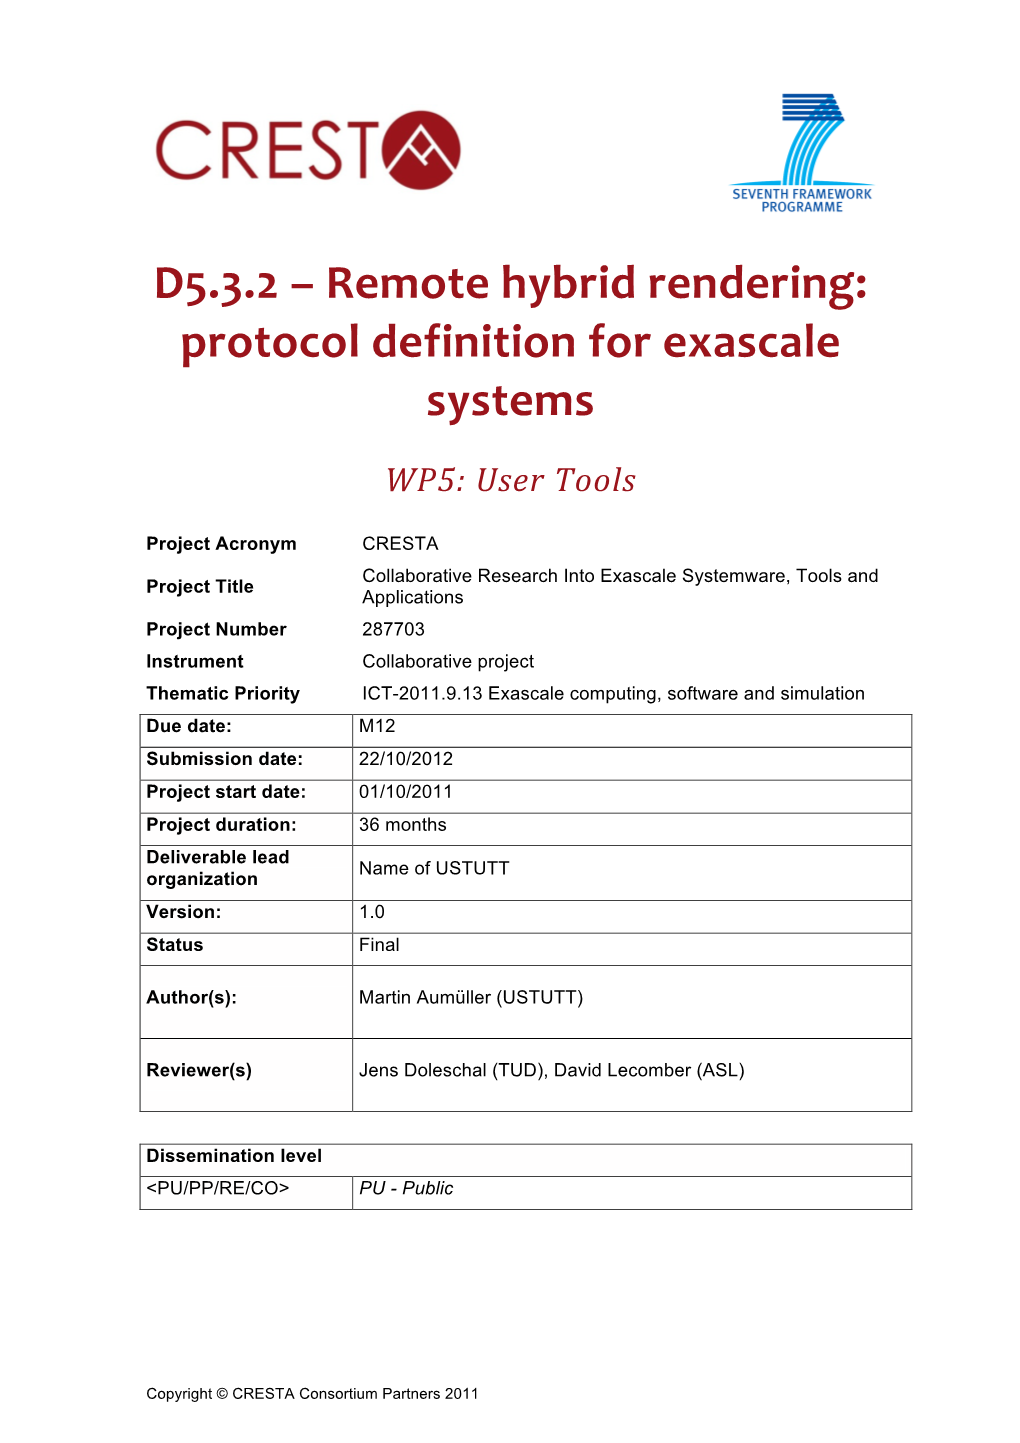 D5.3.2 – Remote Hybrid Rendering: Protocol Definition for Exascale Systems